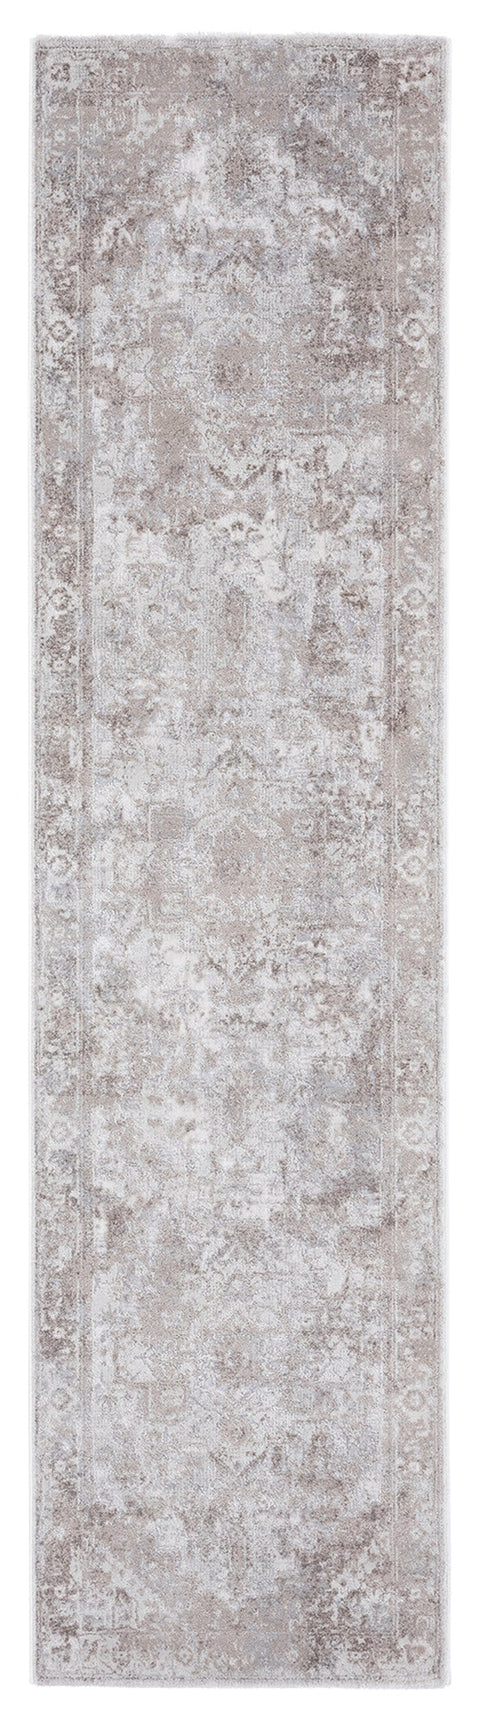 Morgan Beige and Brown Transitional Distressed Medallion Runner Rug